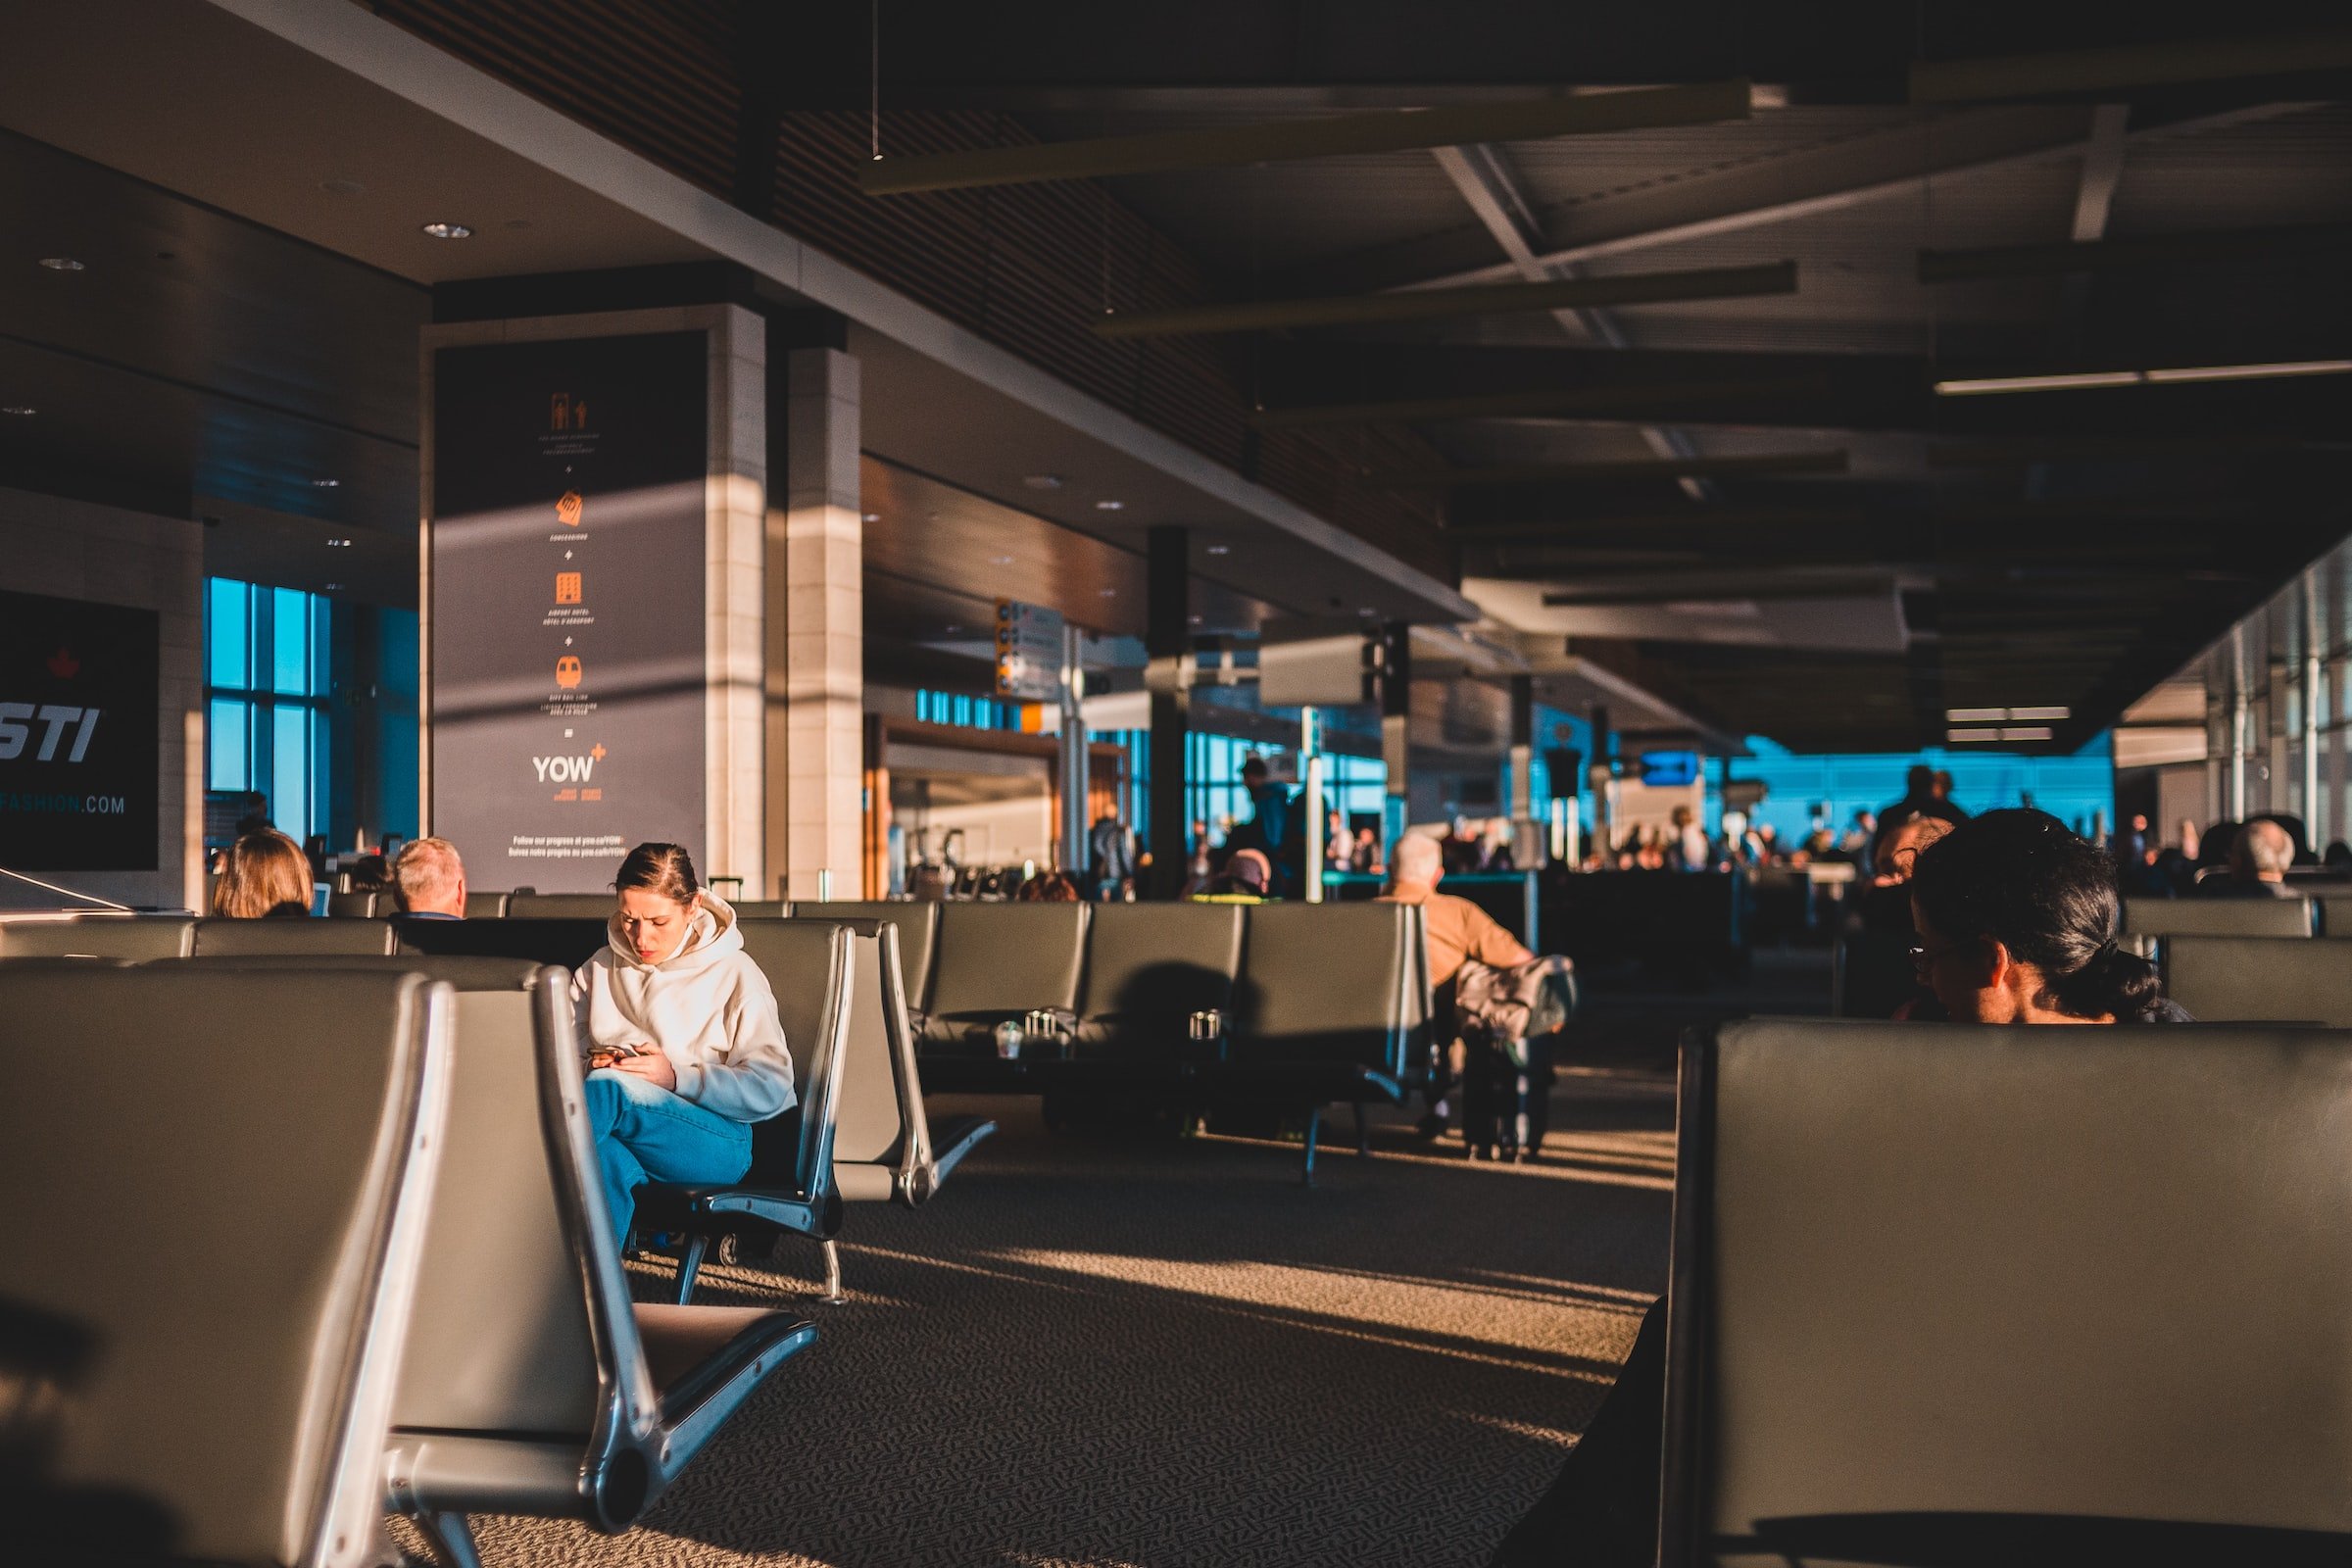 People sitting at an airport waiting lounge. | Source: Unsplash